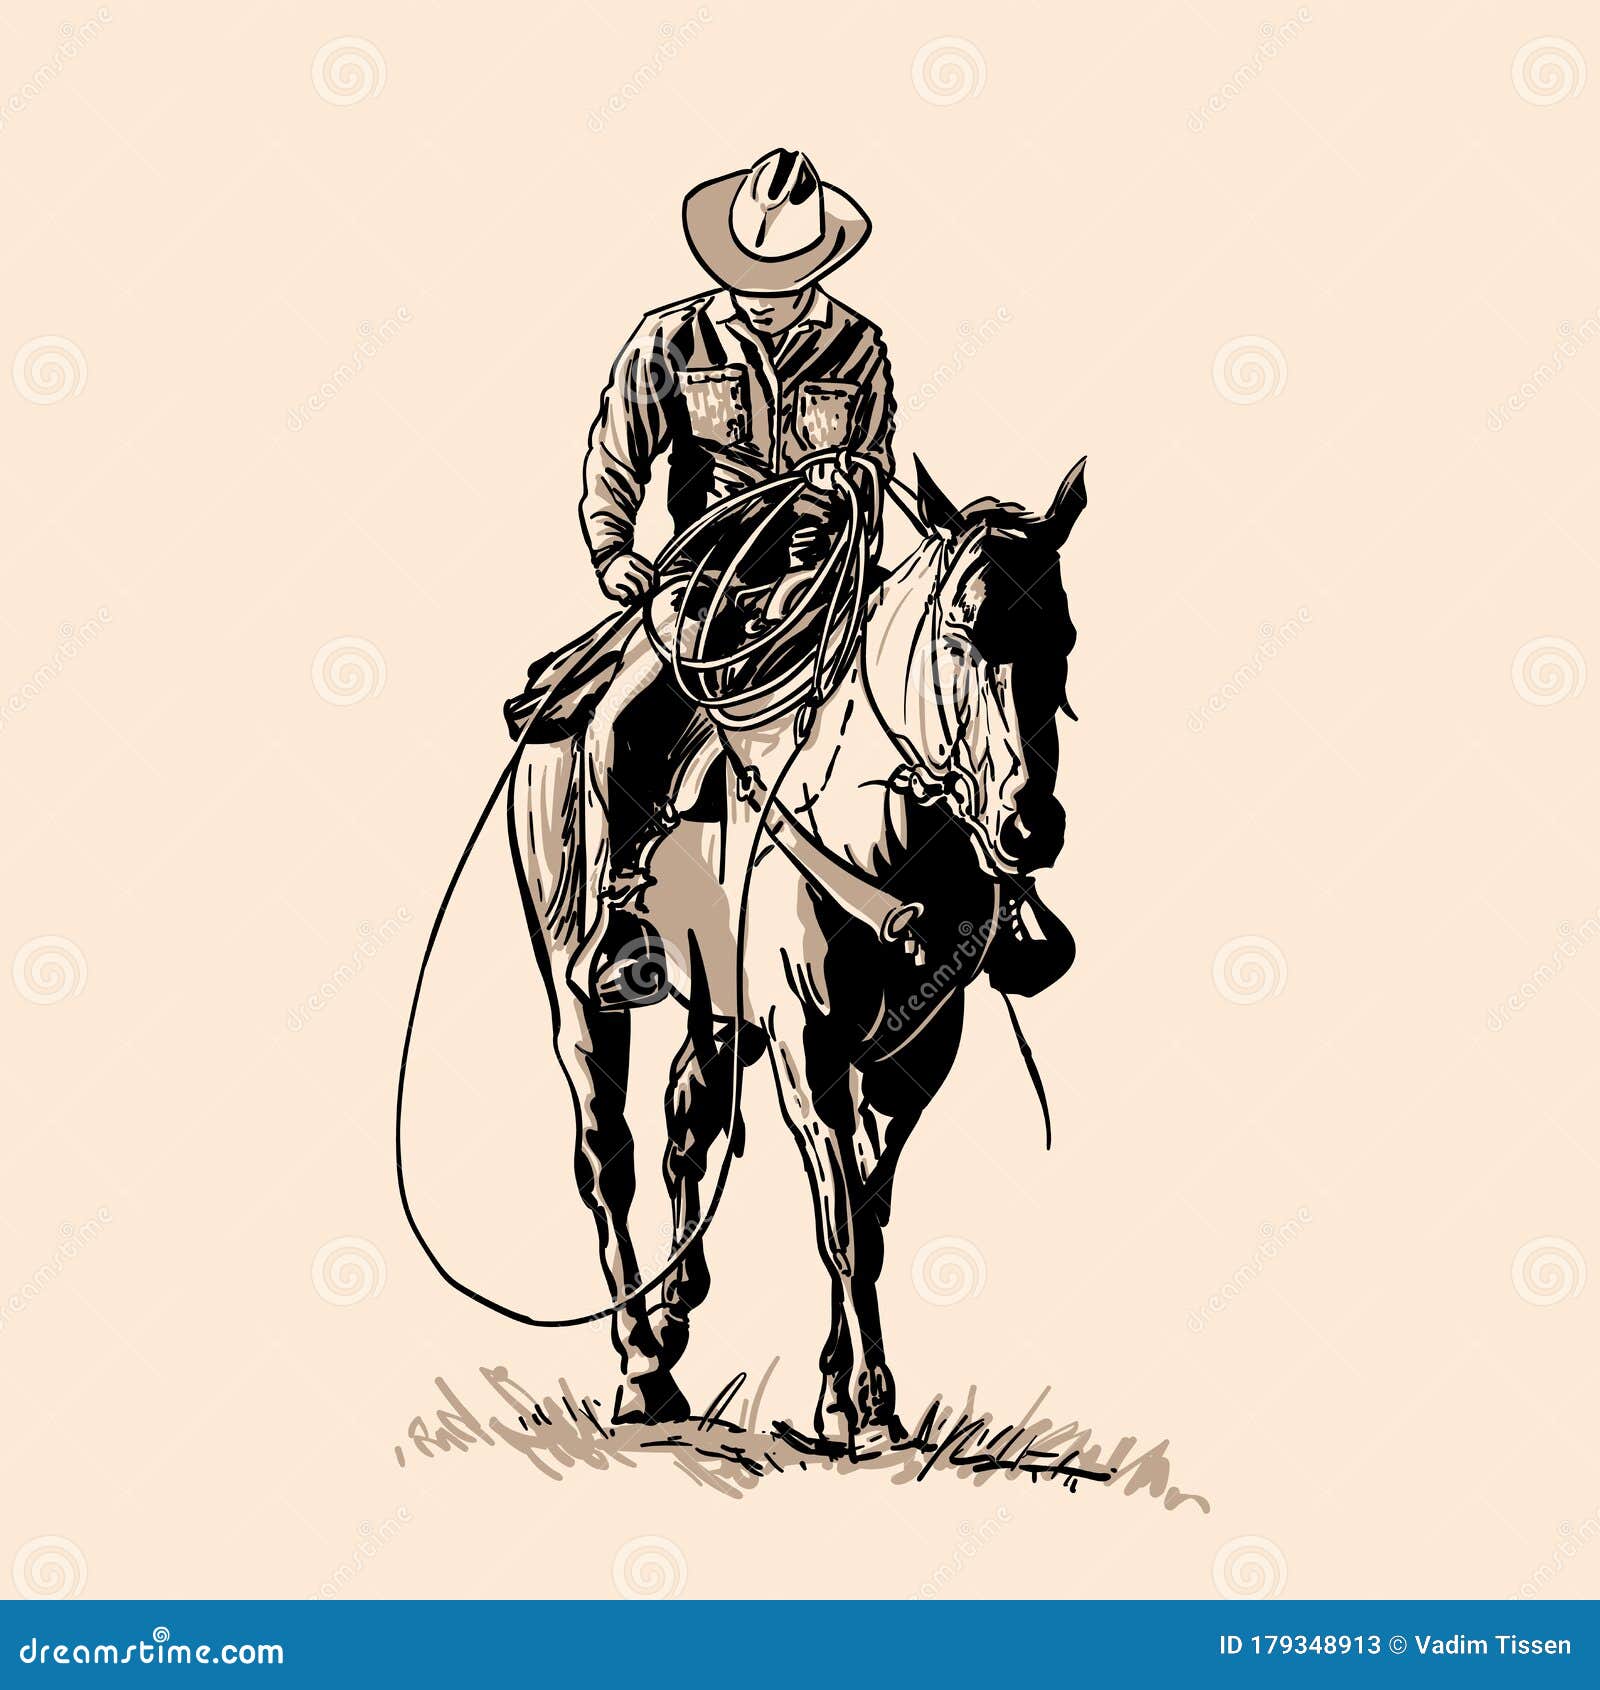 Cowboy on mountain Drawing by Cristina Jaco - Pixels